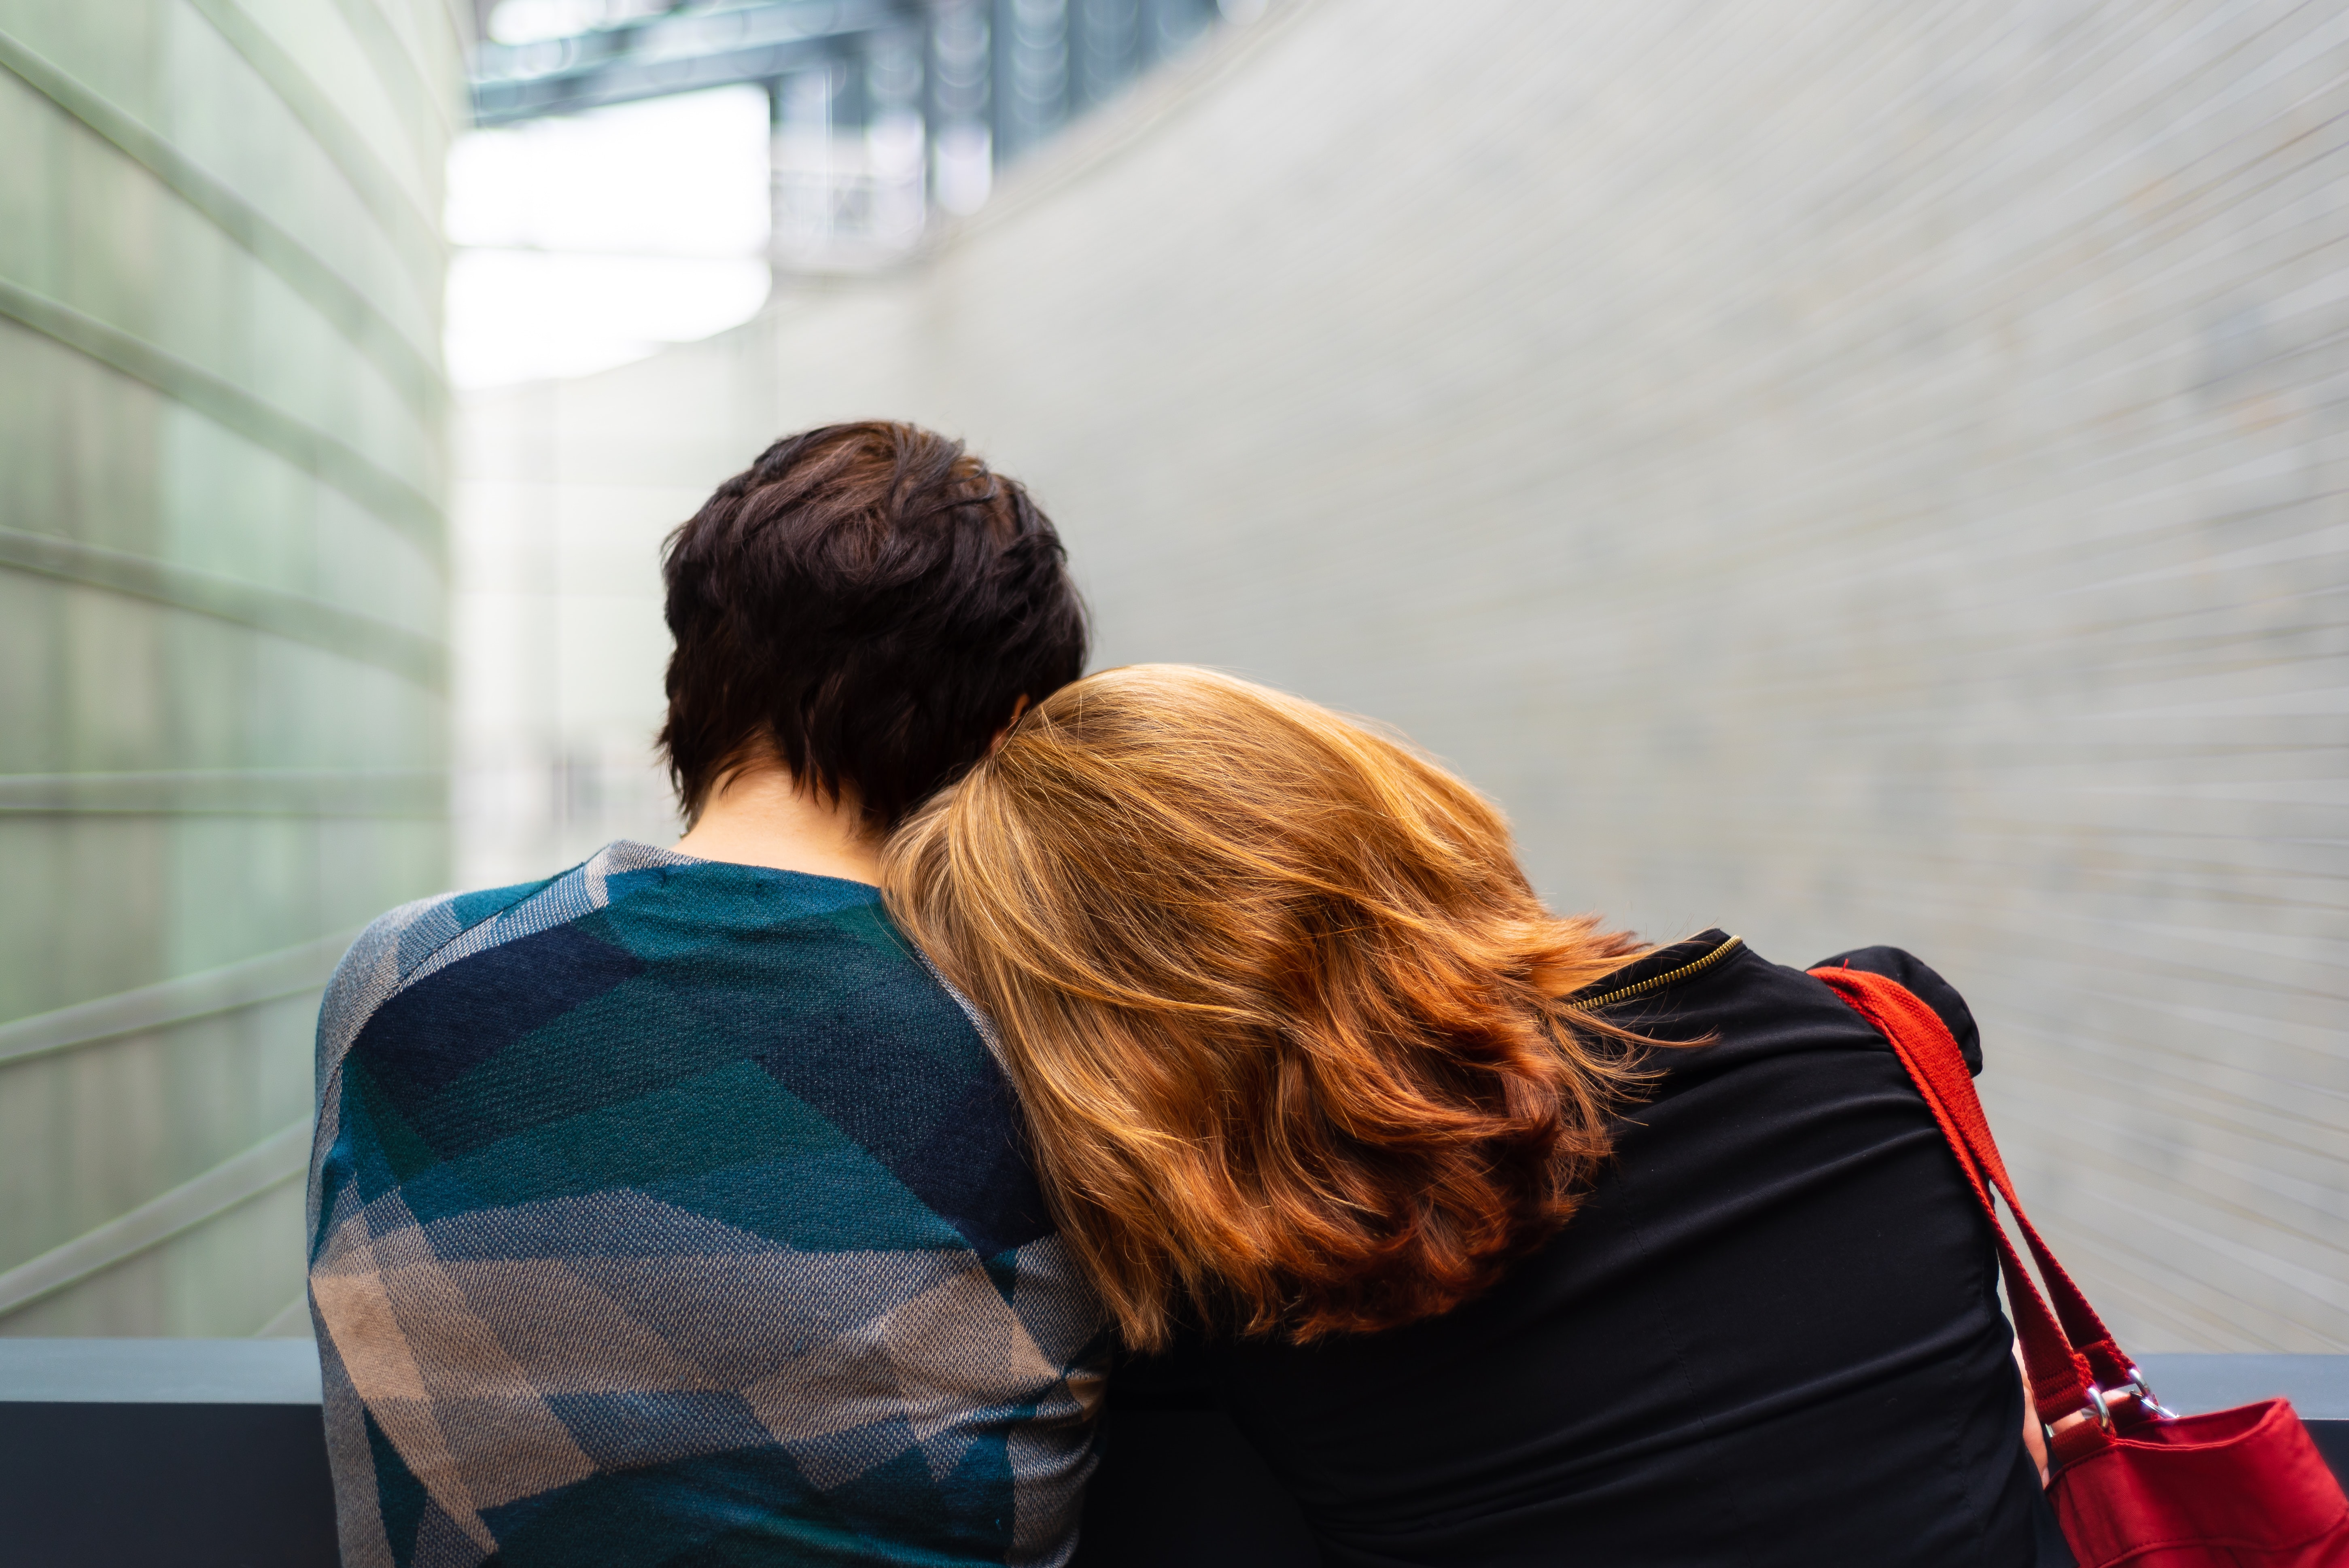 leaning on a friend's shoulder_expat nest tips for supporting a loved one through loss